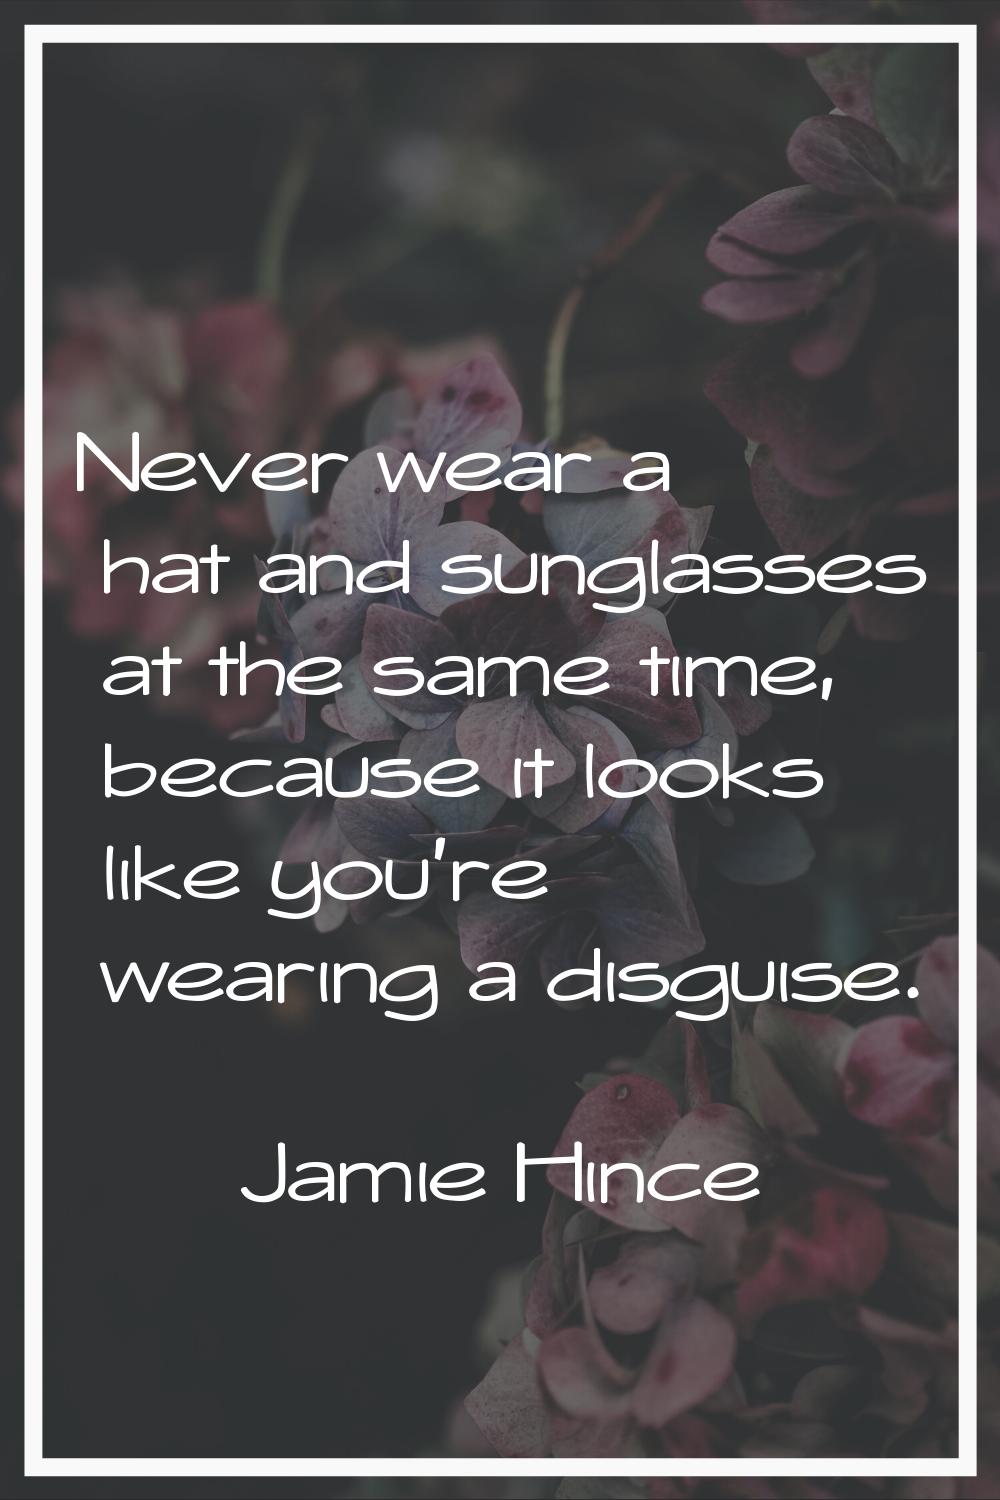 Never wear a hat and sunglasses at the same time, because it looks like you're wearing a disguise.